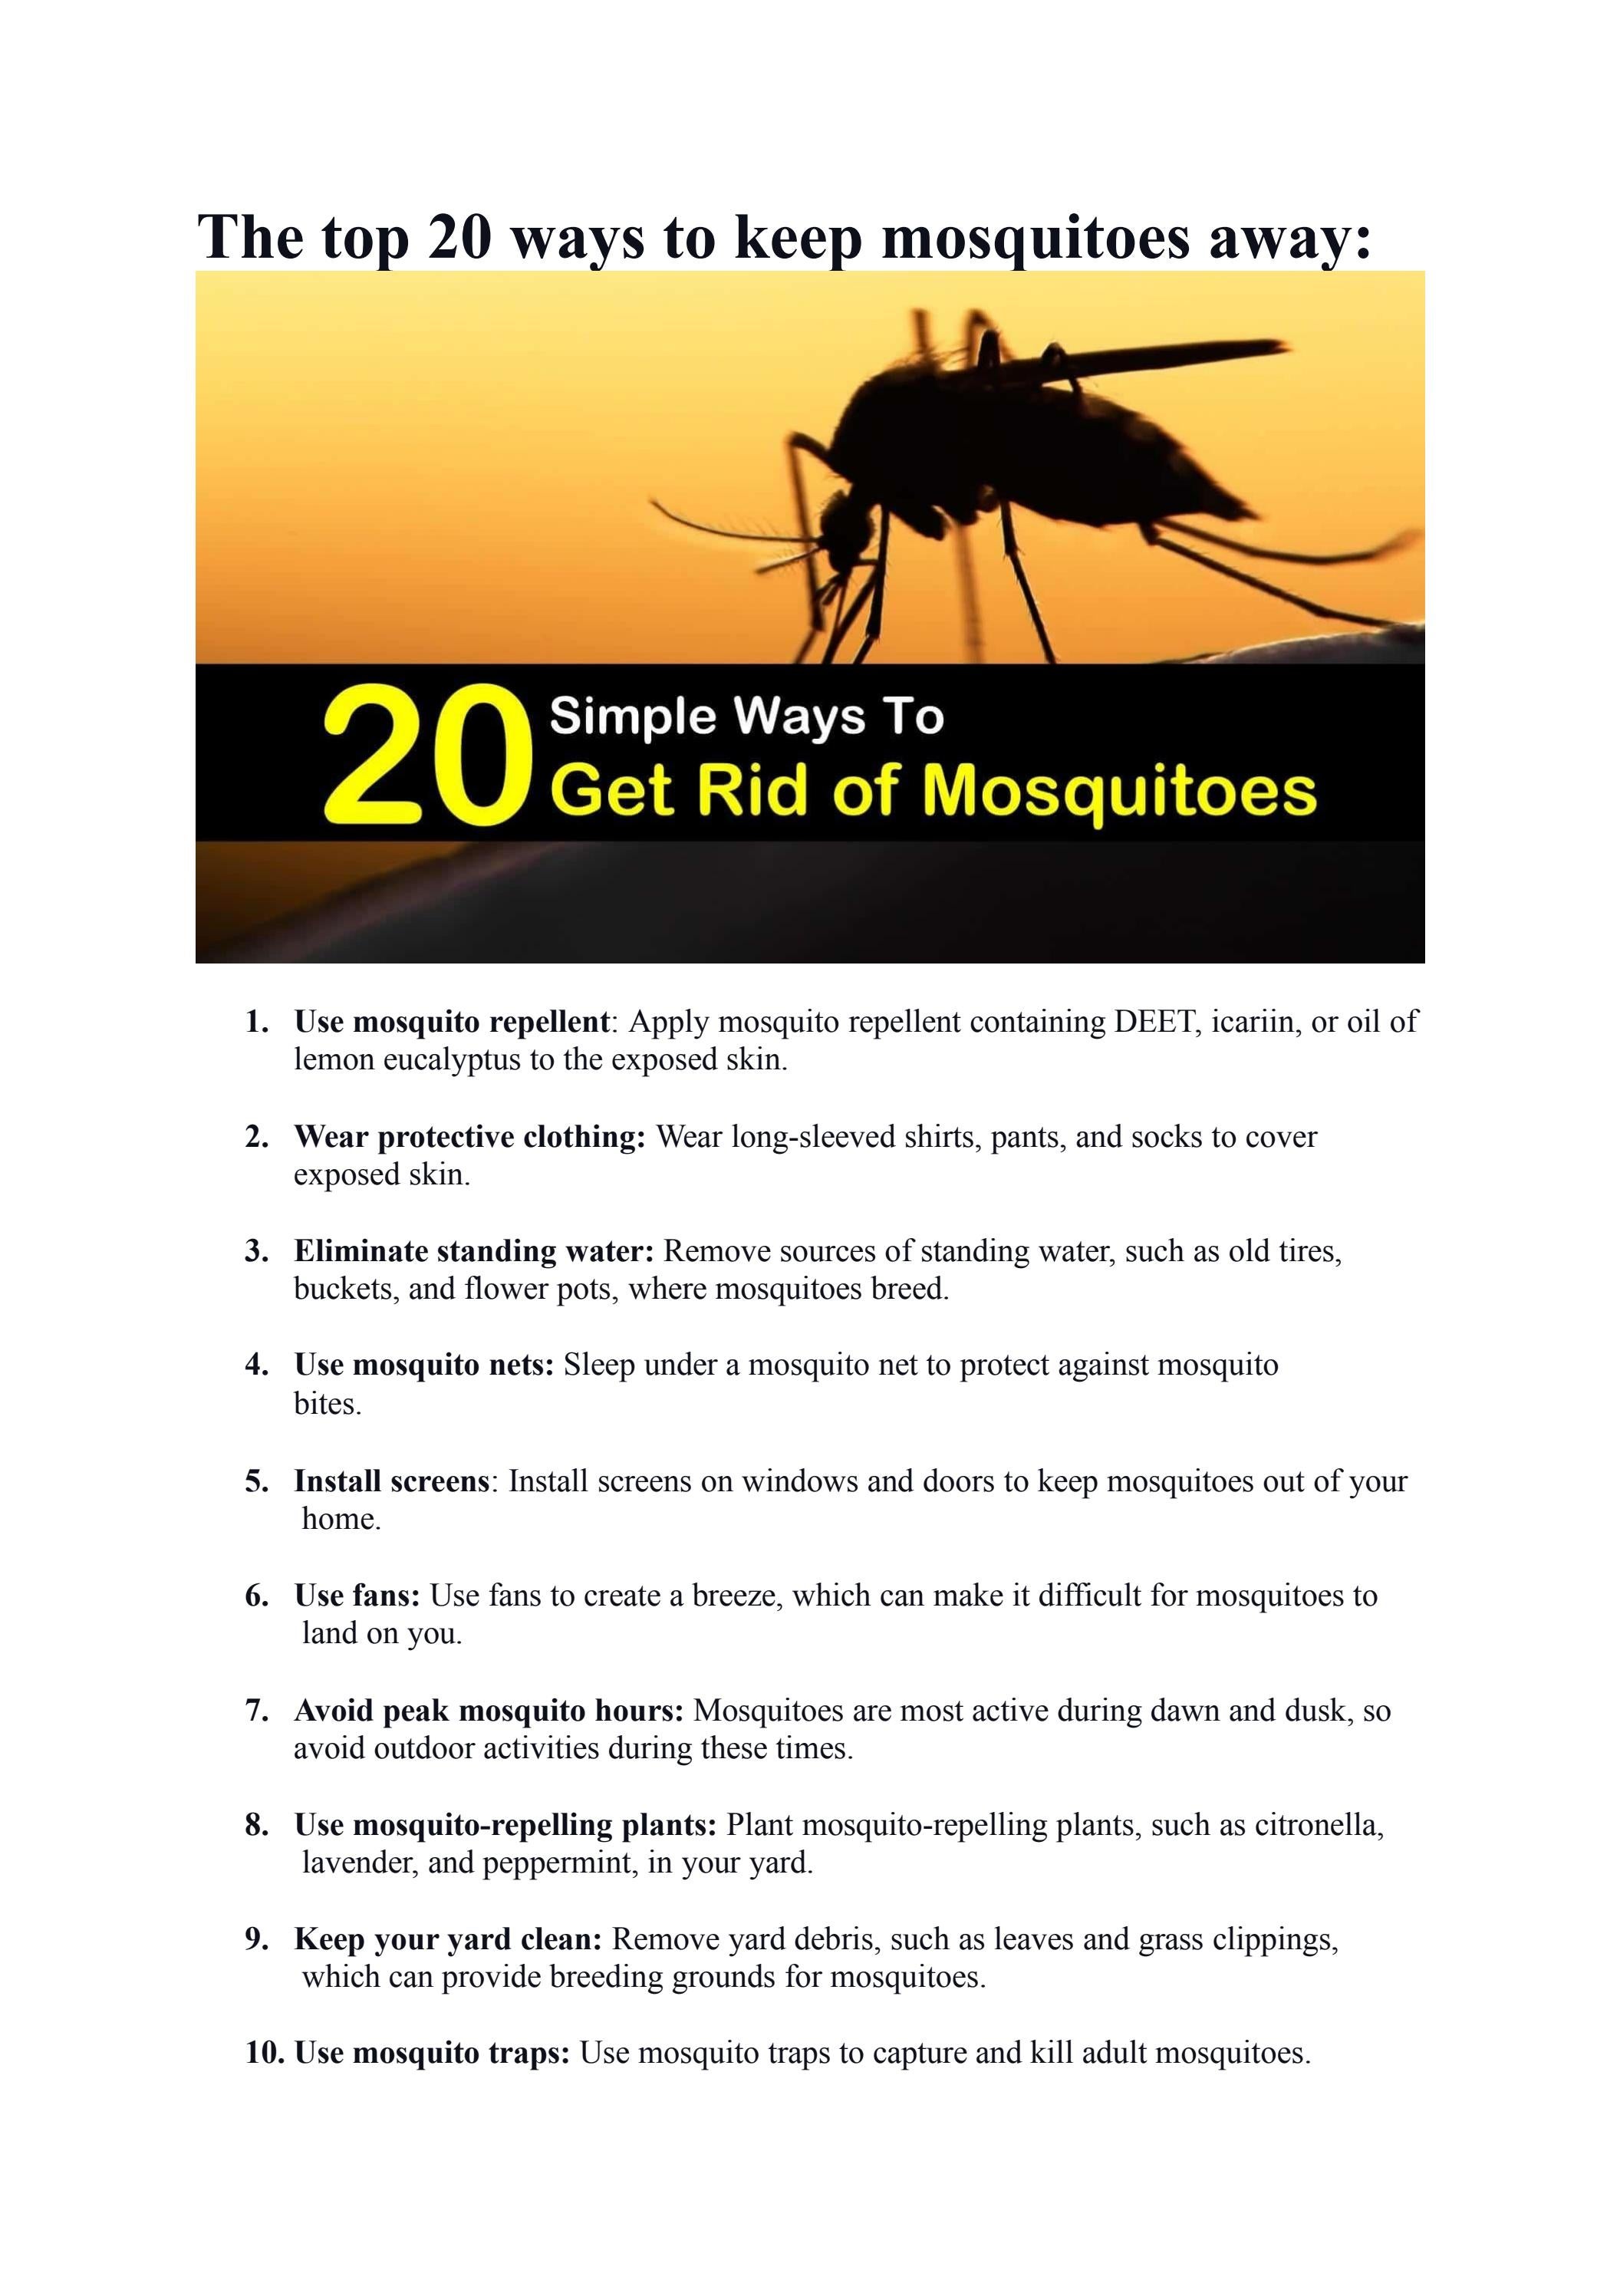 Do fans keep mosquitoes away What you need to know to deter the pest effectively